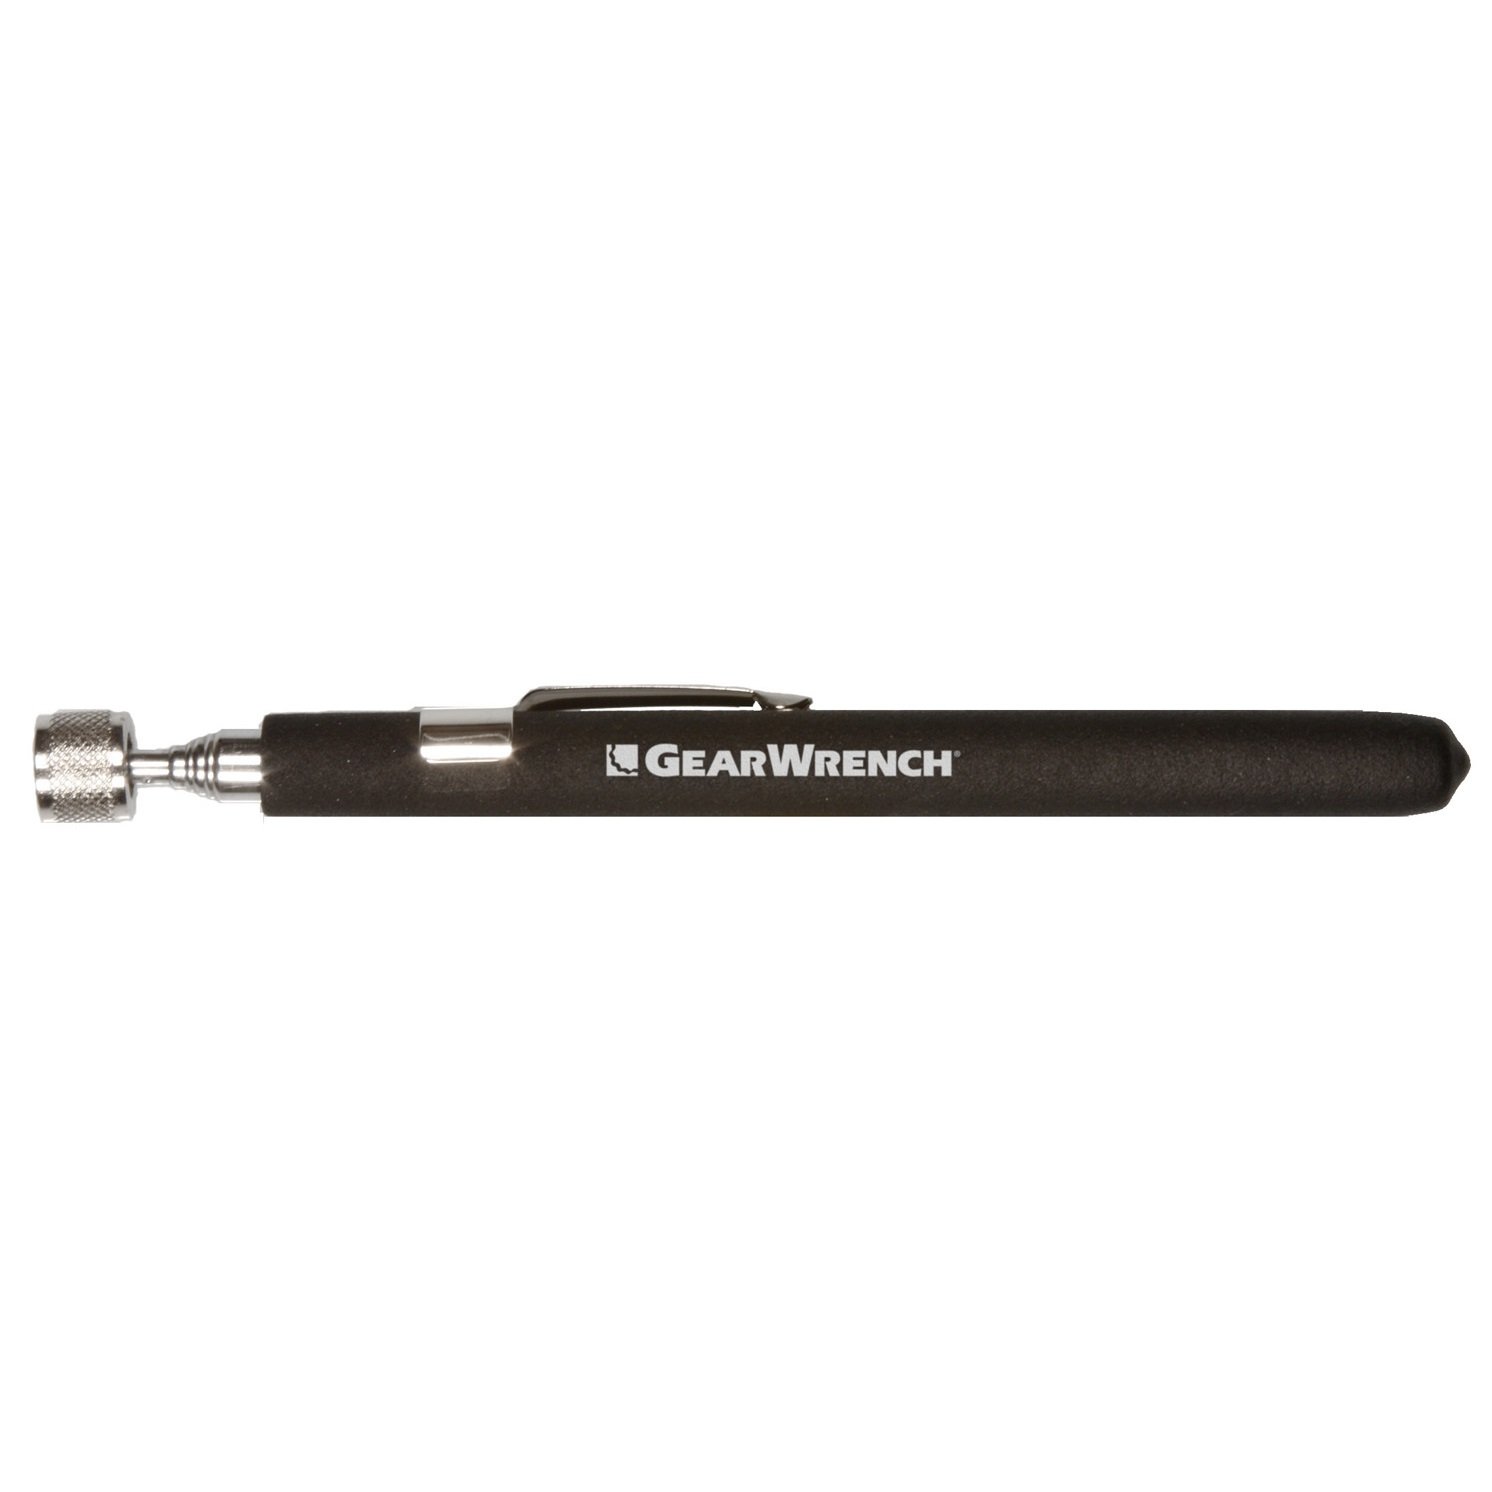 GearWrench Telescoping Magnetic Pickup Tool 1.1kg / 2.5 lb Capacity 84088